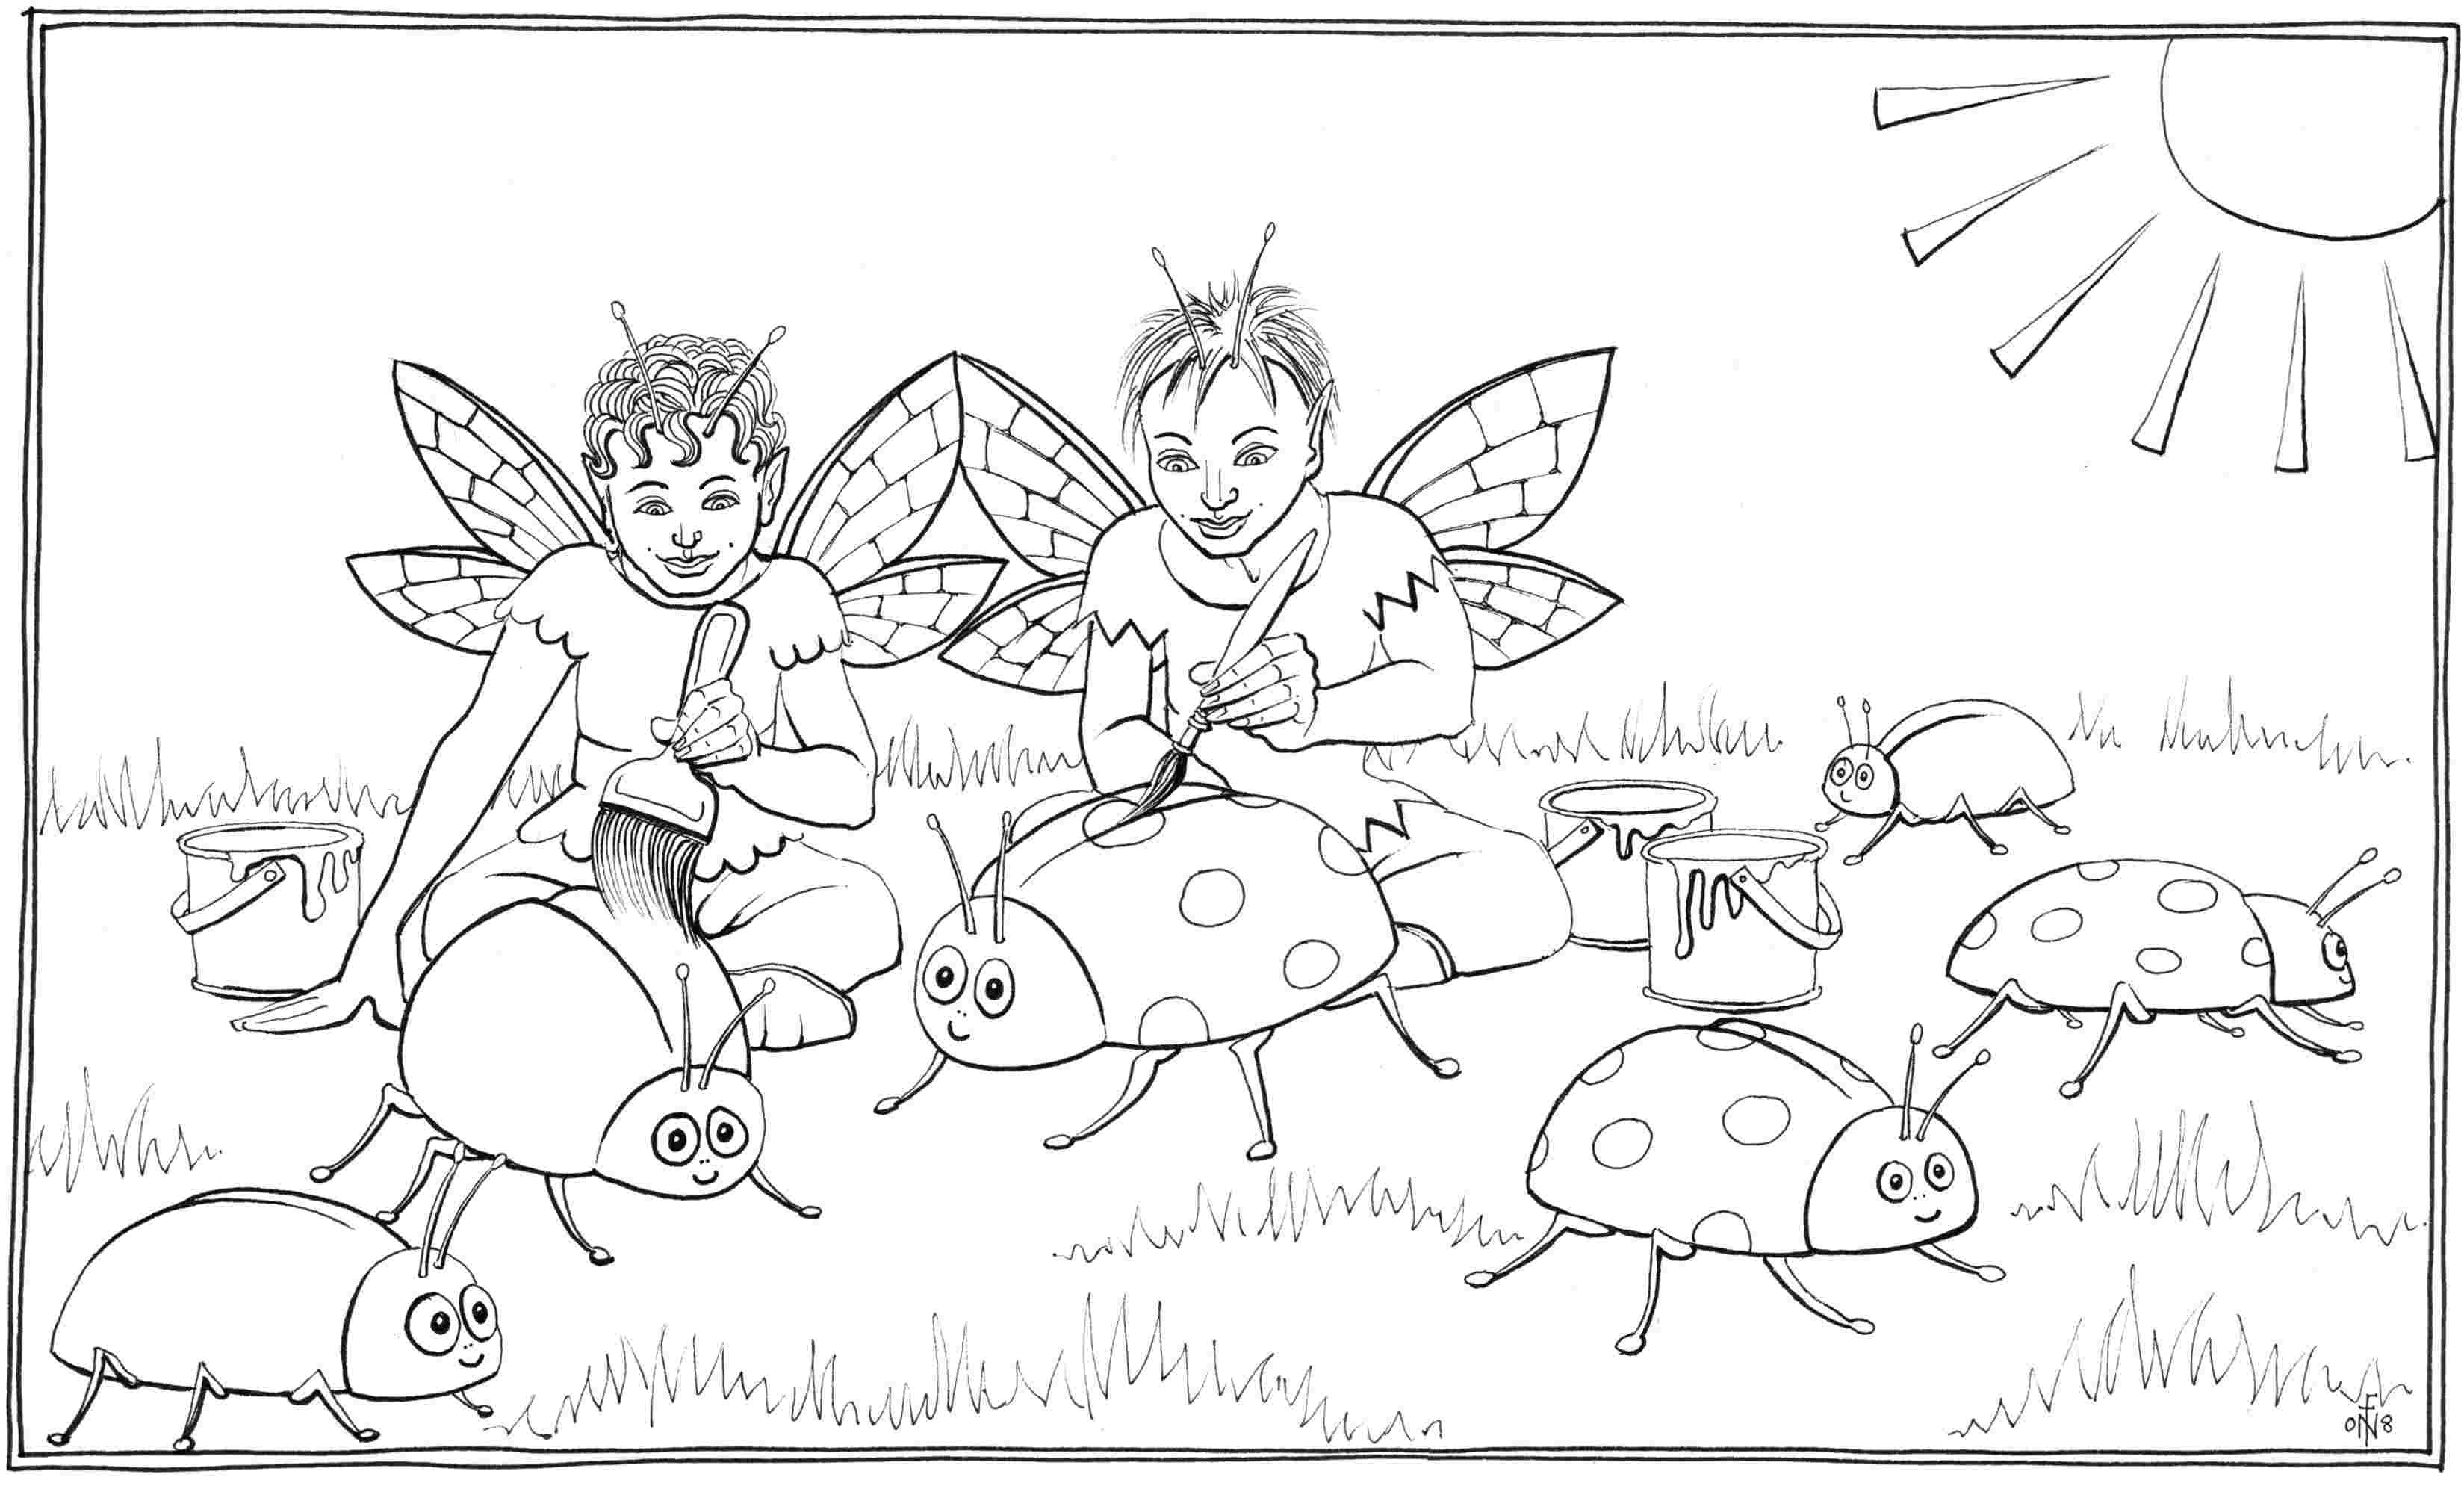 Painting Ladybirds - colouring-in drawing - to download, right click and save, print out and colour in!